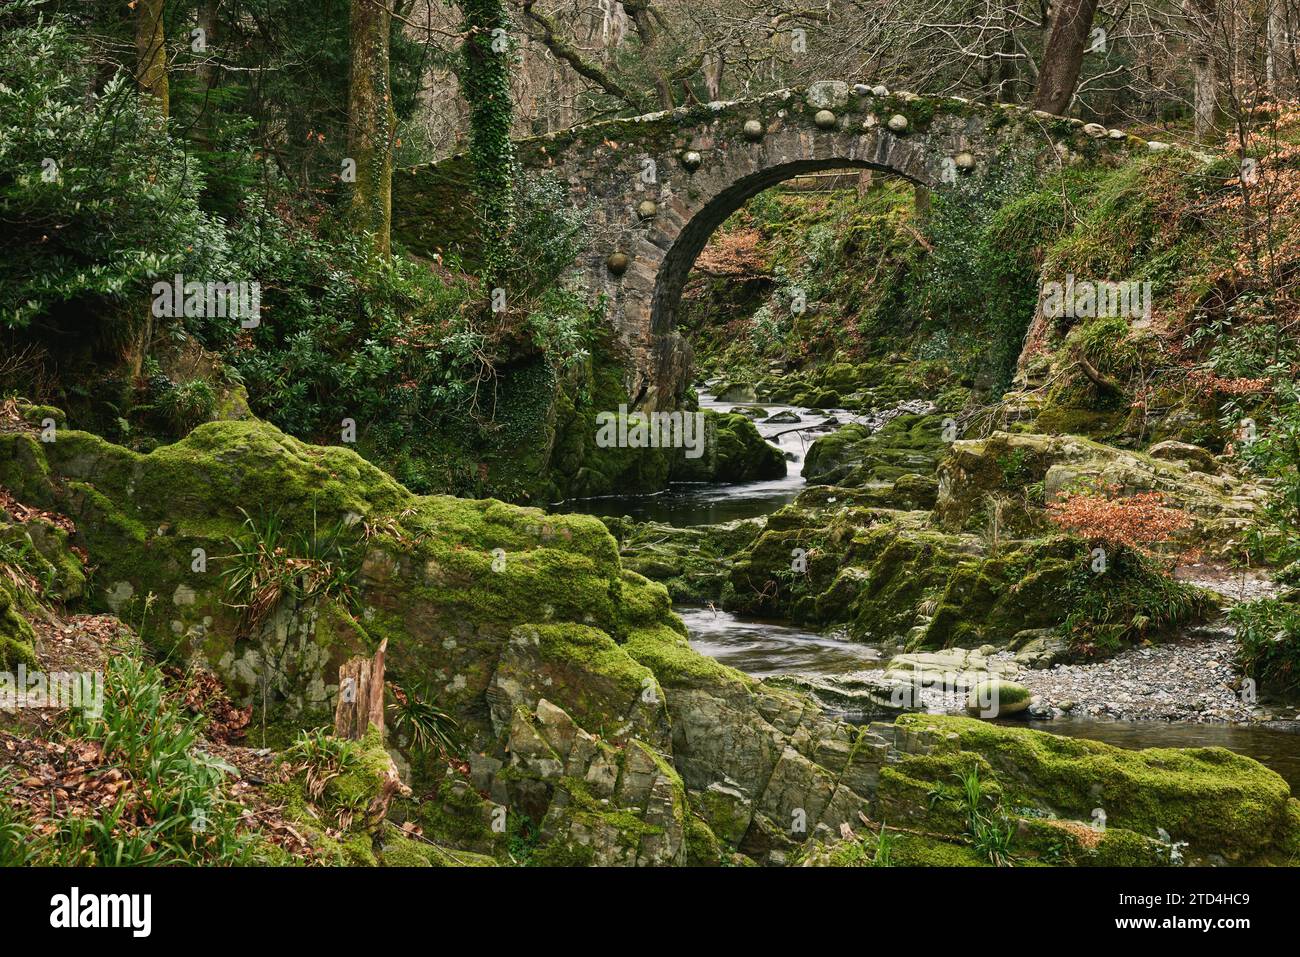 Foley's Bridge in Tollymore Forest Park, County Down, Northern Ireland. This has been featured in many films including Dungeons & Dragons. Stock Photo